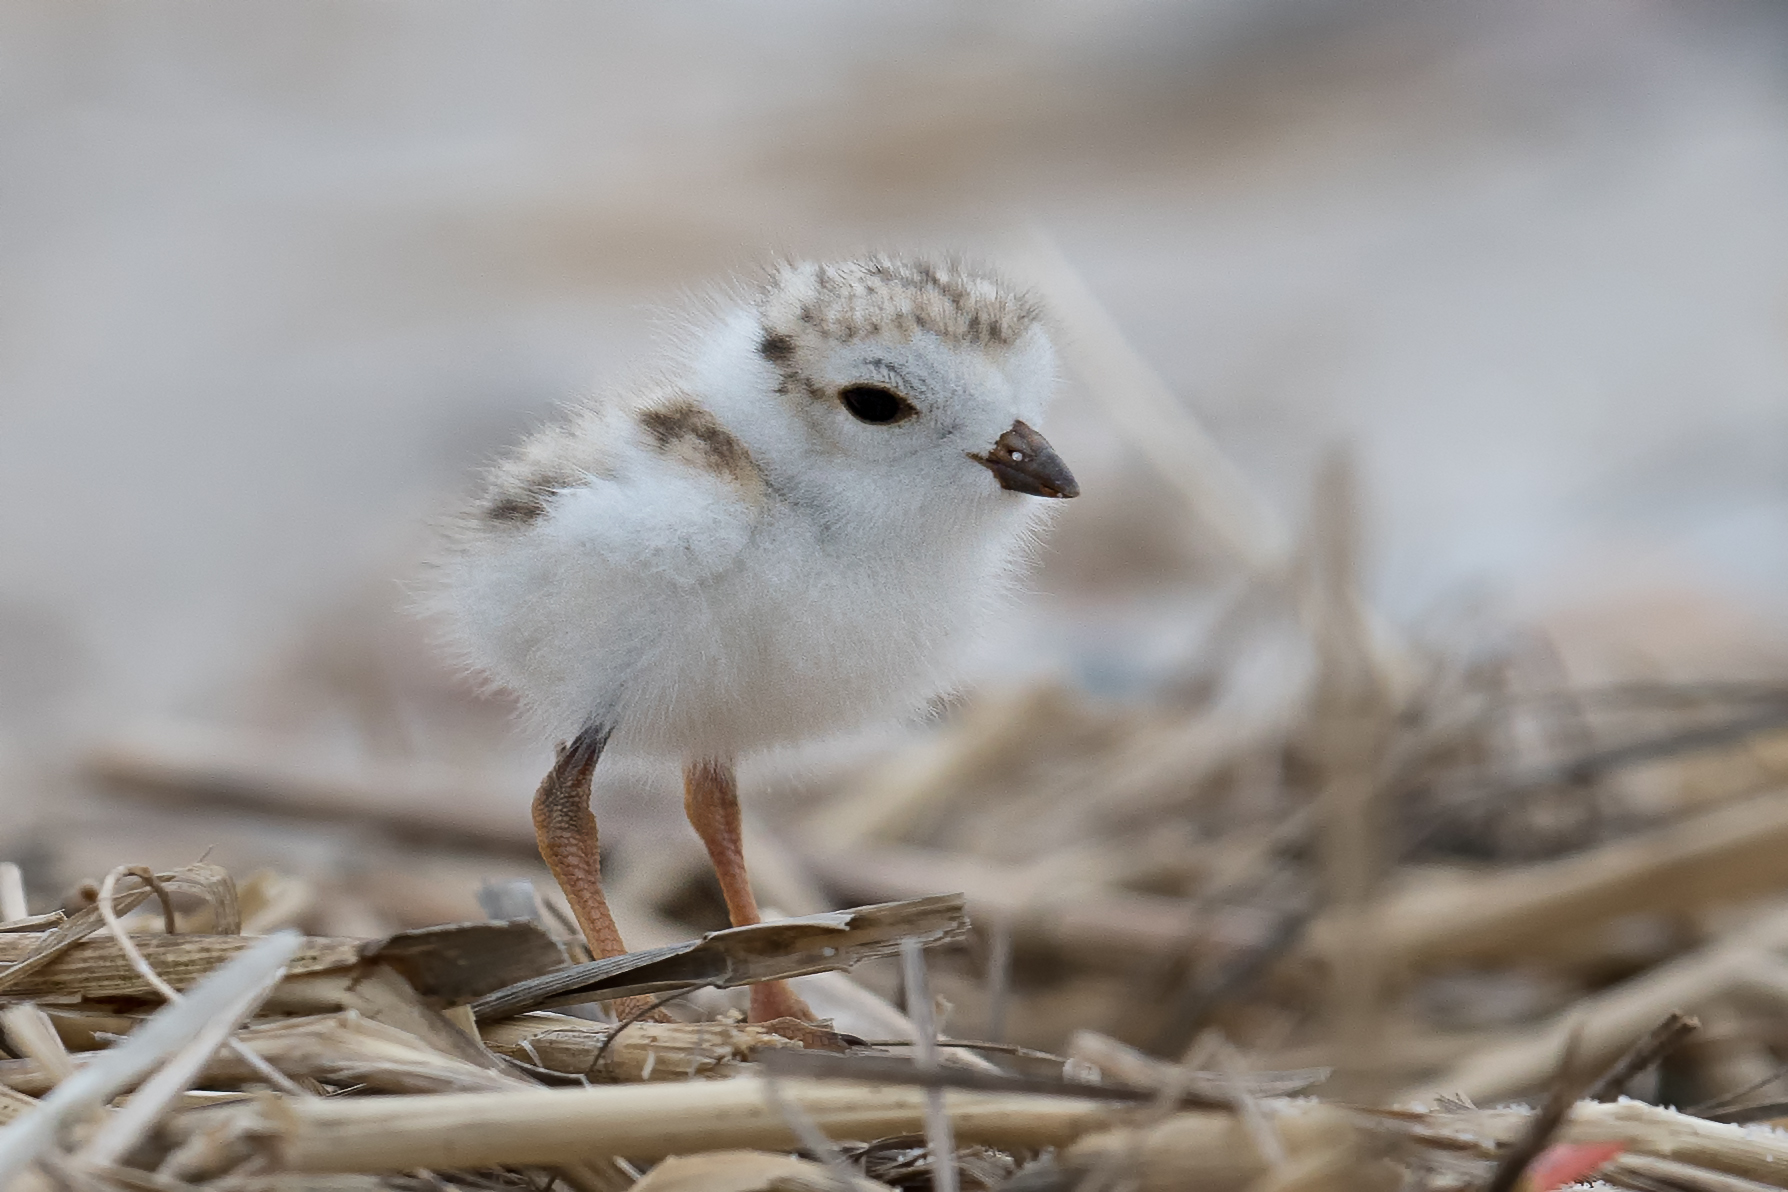 Piping_plover_chick,_west_meadow_beach_(27462239585)